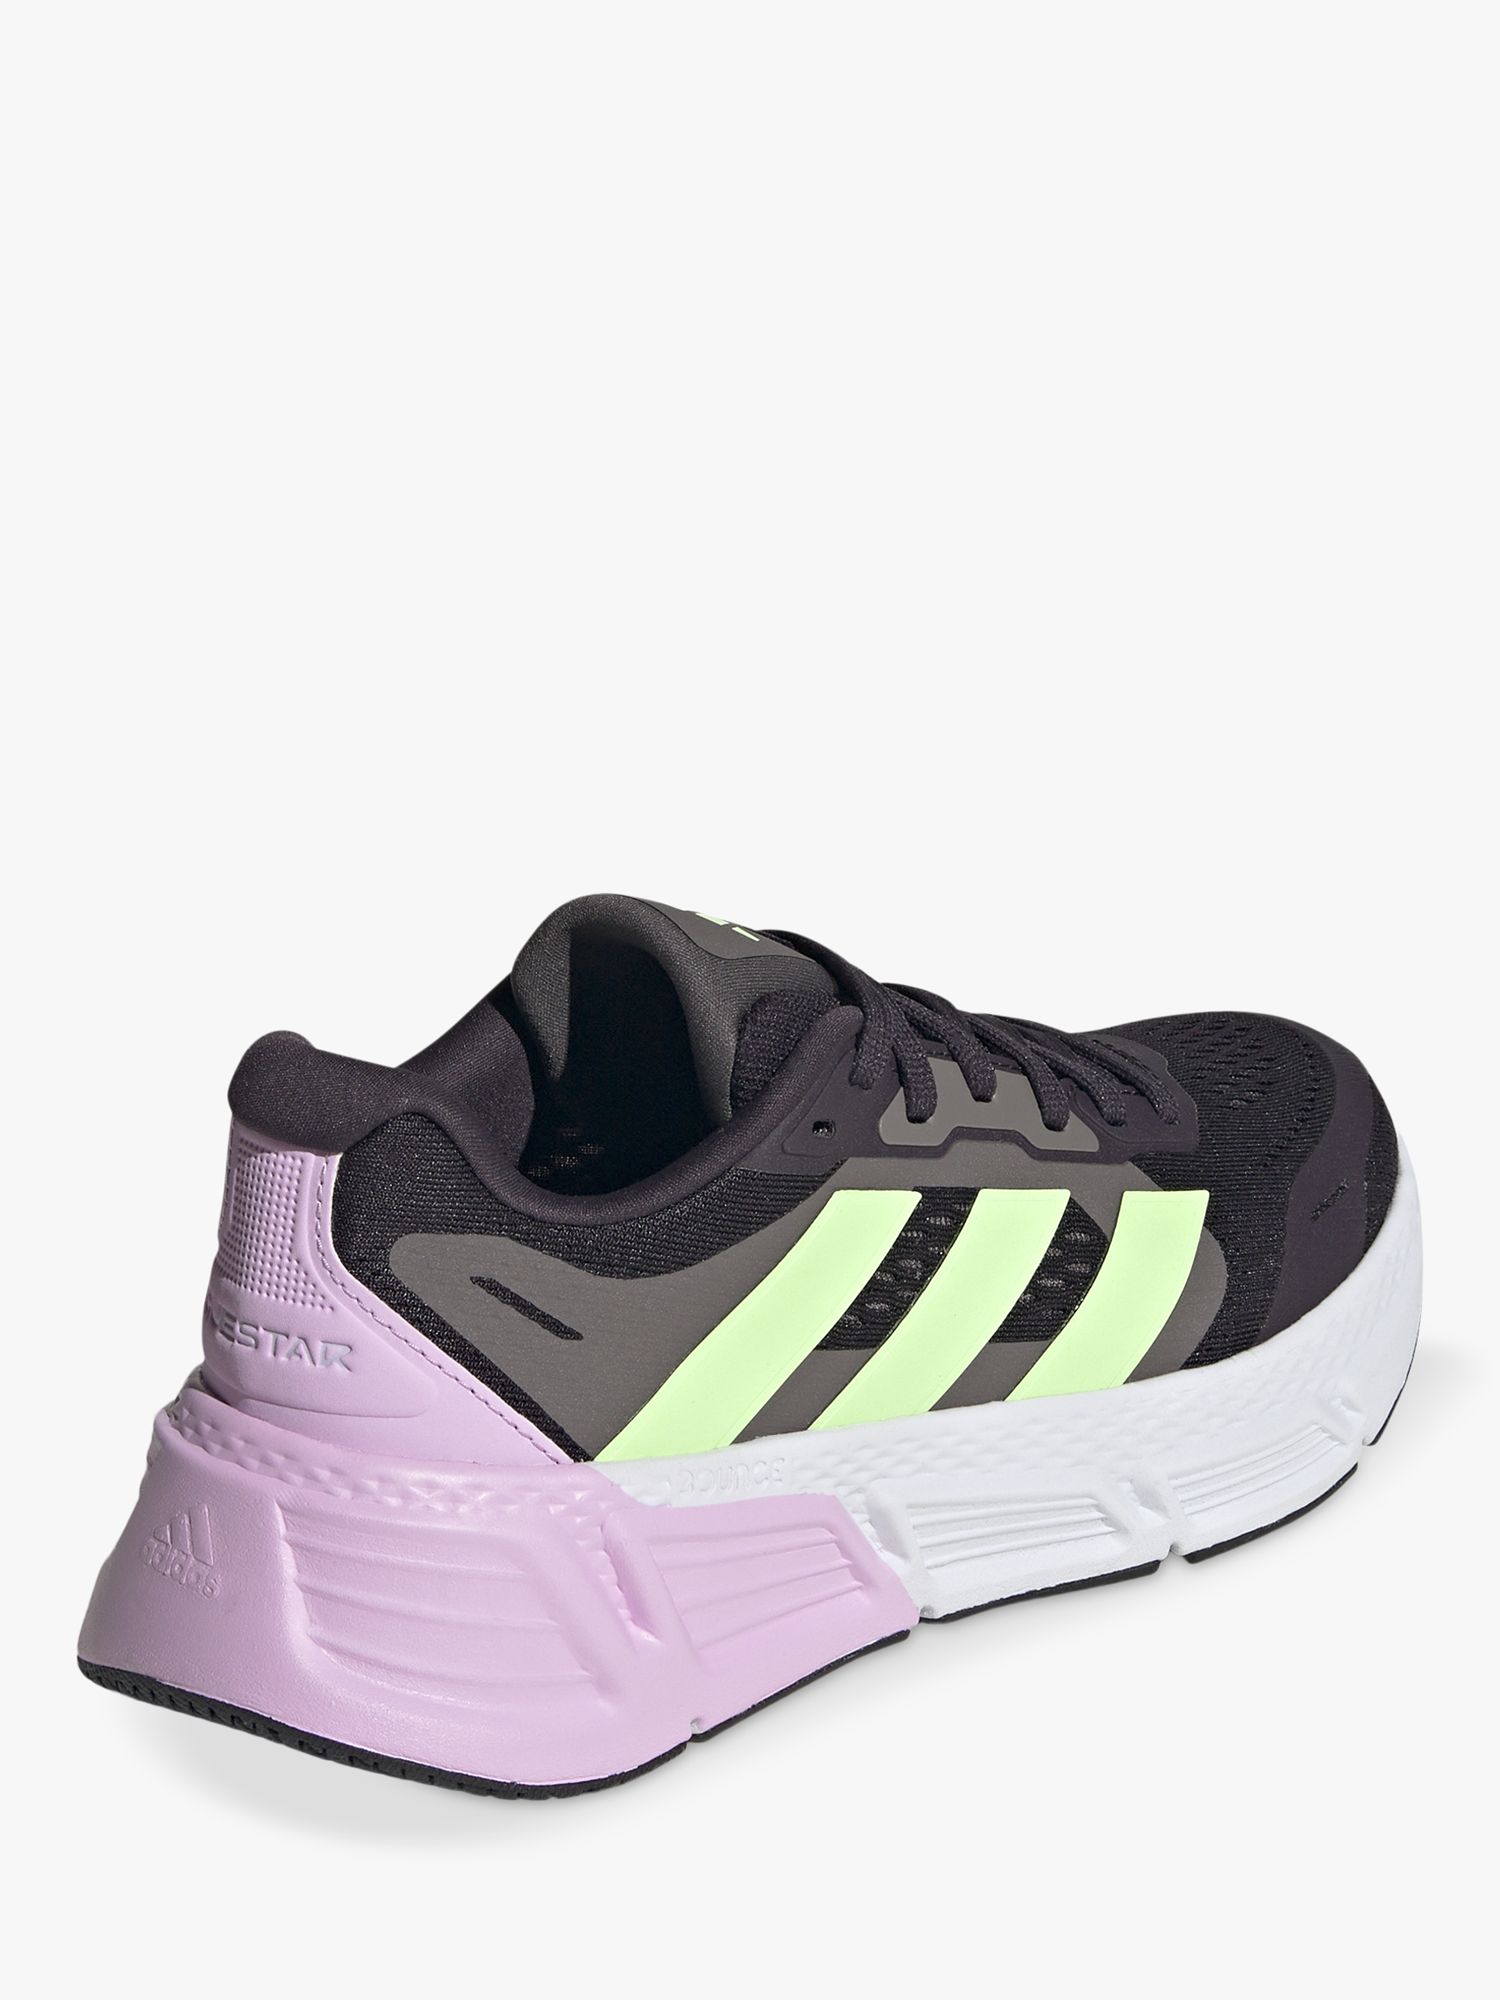 Buy adidas Questar 2 Bounce Women's Running Shoes Online at johnlewis.com